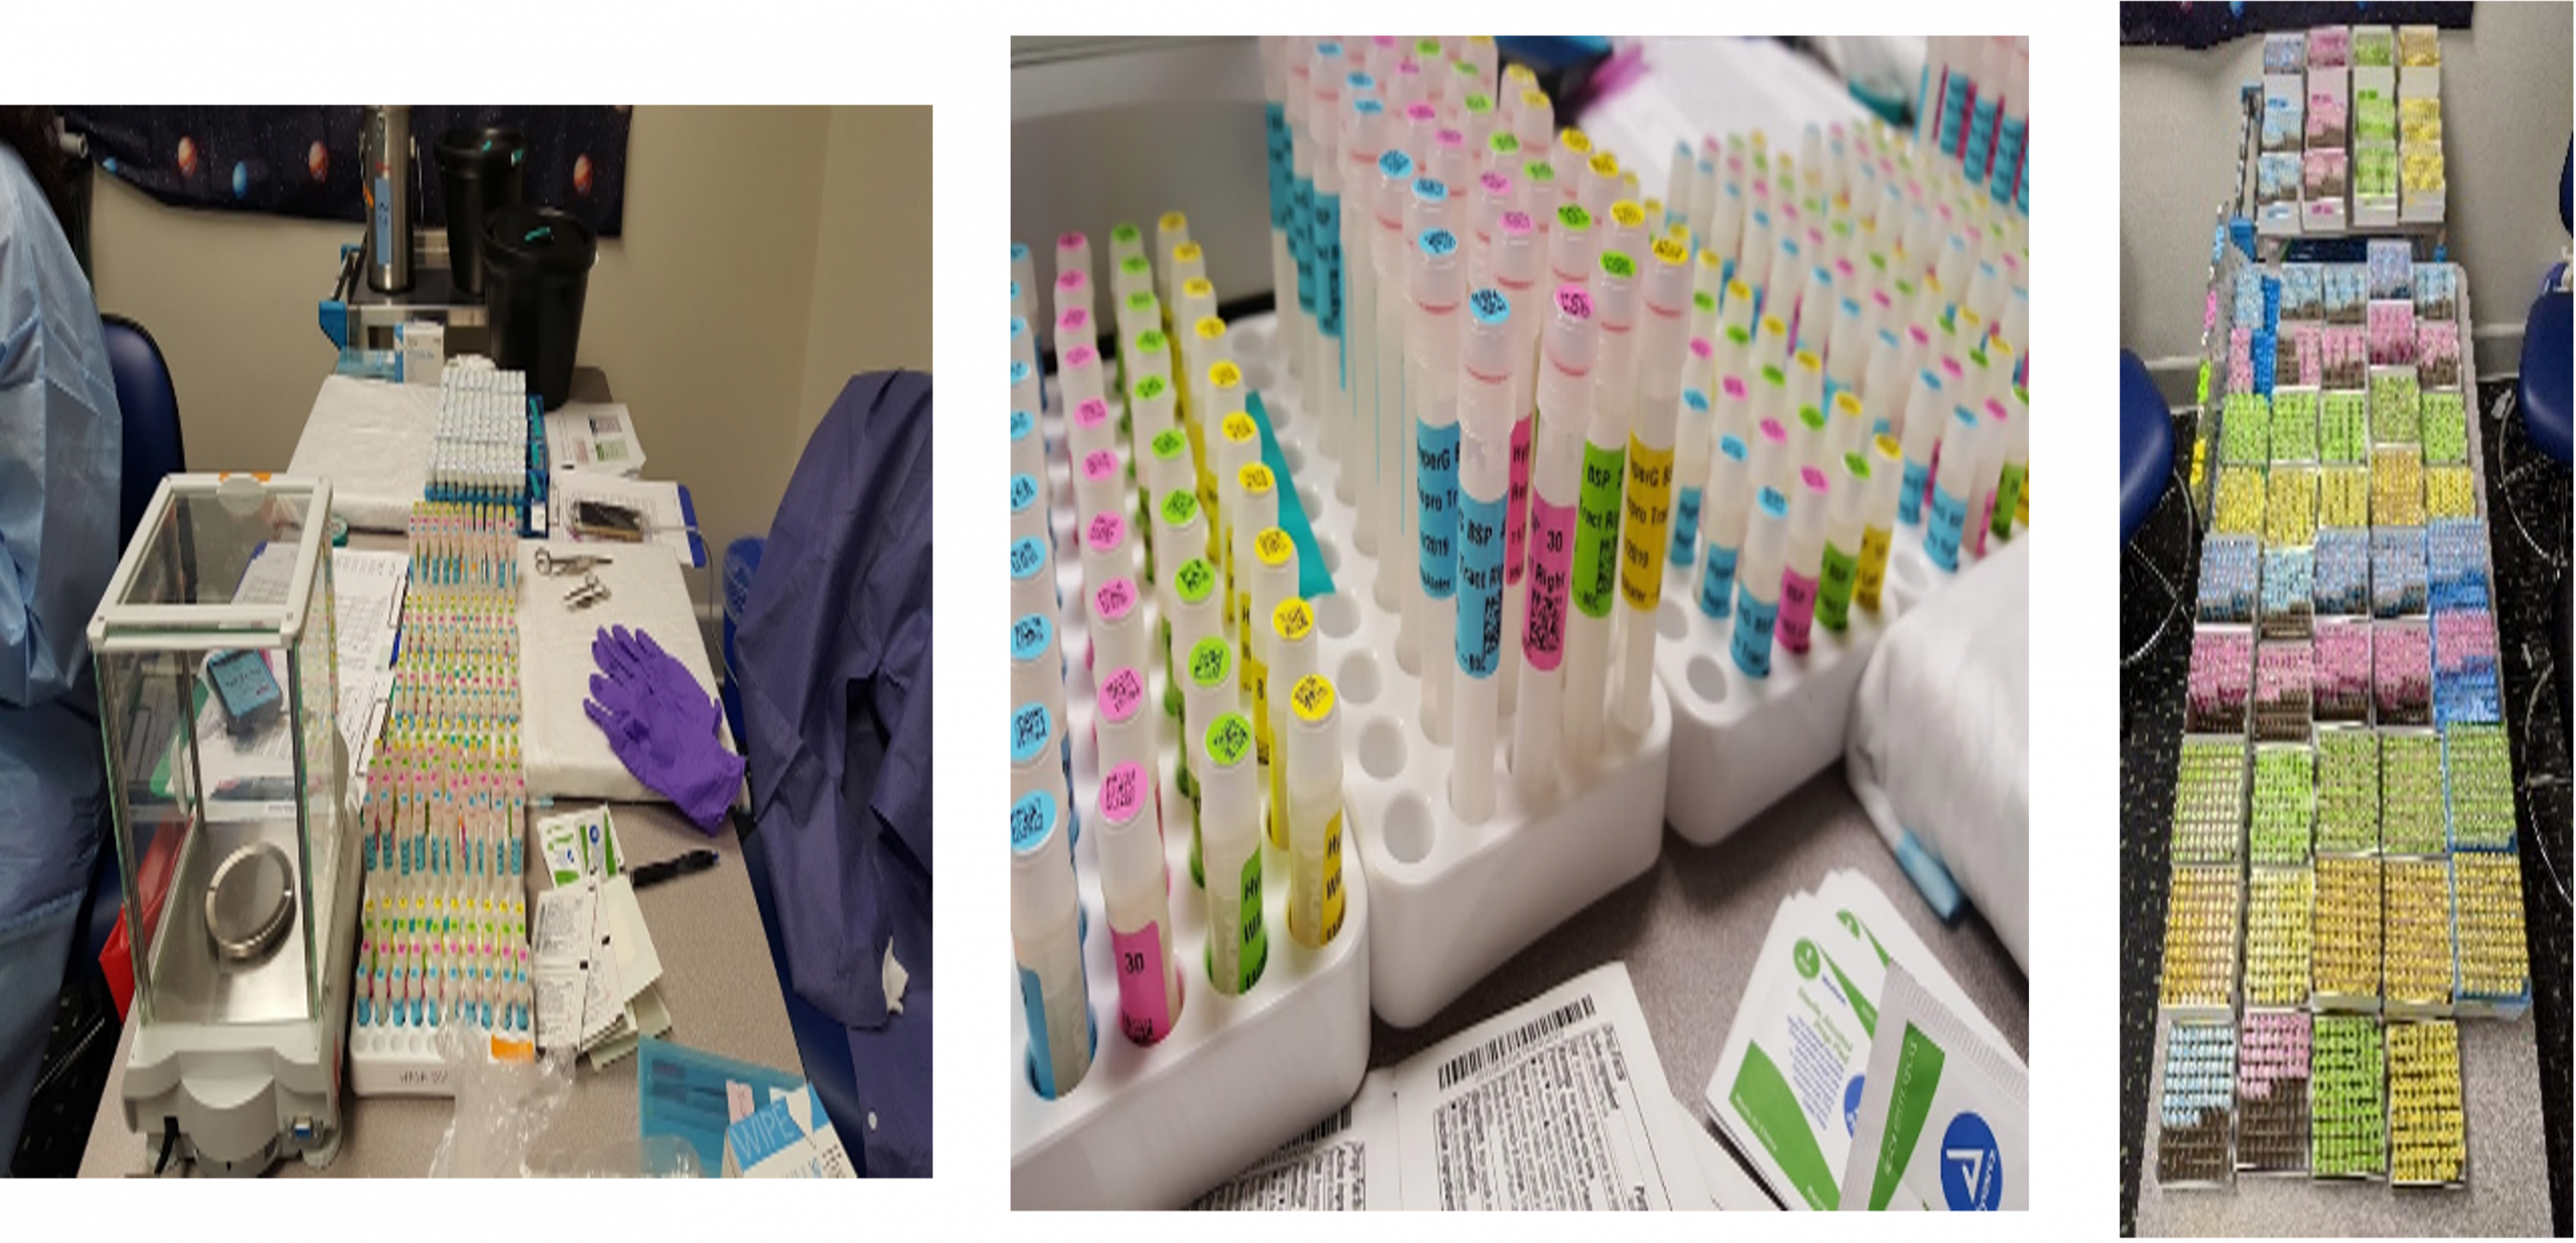 (Left): A rectangular table with workstations on the left and right sides, color-coded vials in the center, ice buckets and a metal container in the background, and an analytical balance in the foreground. Alt Text (Center): A close-up view of two different-sized, color-coded collection vials categorized in separate white racks. Text (Right): A birds-eye view of many boxes containing color-coded vials spread out over a table and a cart.